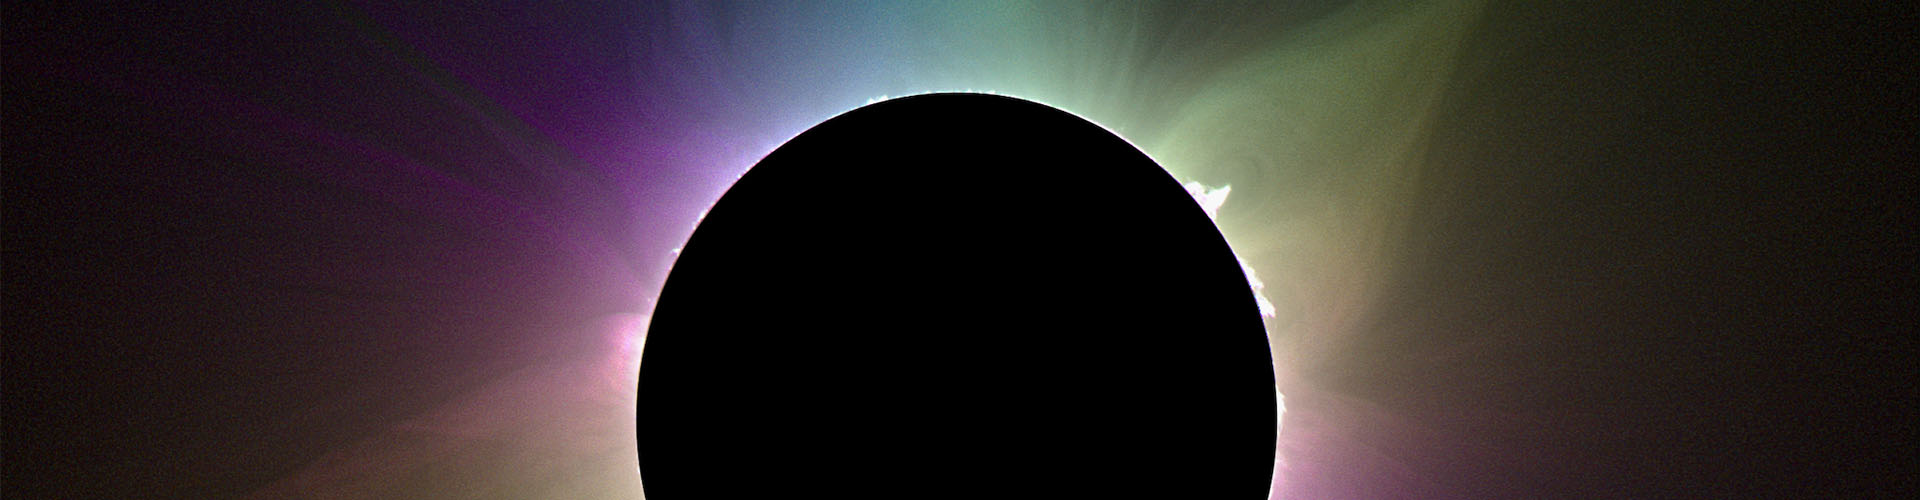 The Sun’s corona, its outermost atmosphere, is typically only visible to the naked eye during a total solar eclipse. The SwRI-led Citizen Continental-America Telescopic Eclipse (CATE) 2024 project evaluated special cameras to measure the polarization of coronal light during the April 2023 total solar eclipse in Exmouth, Western Australia. In this image, the colors indicate the polarization or orientation of the light. The white features, called prominences, have no polarization.